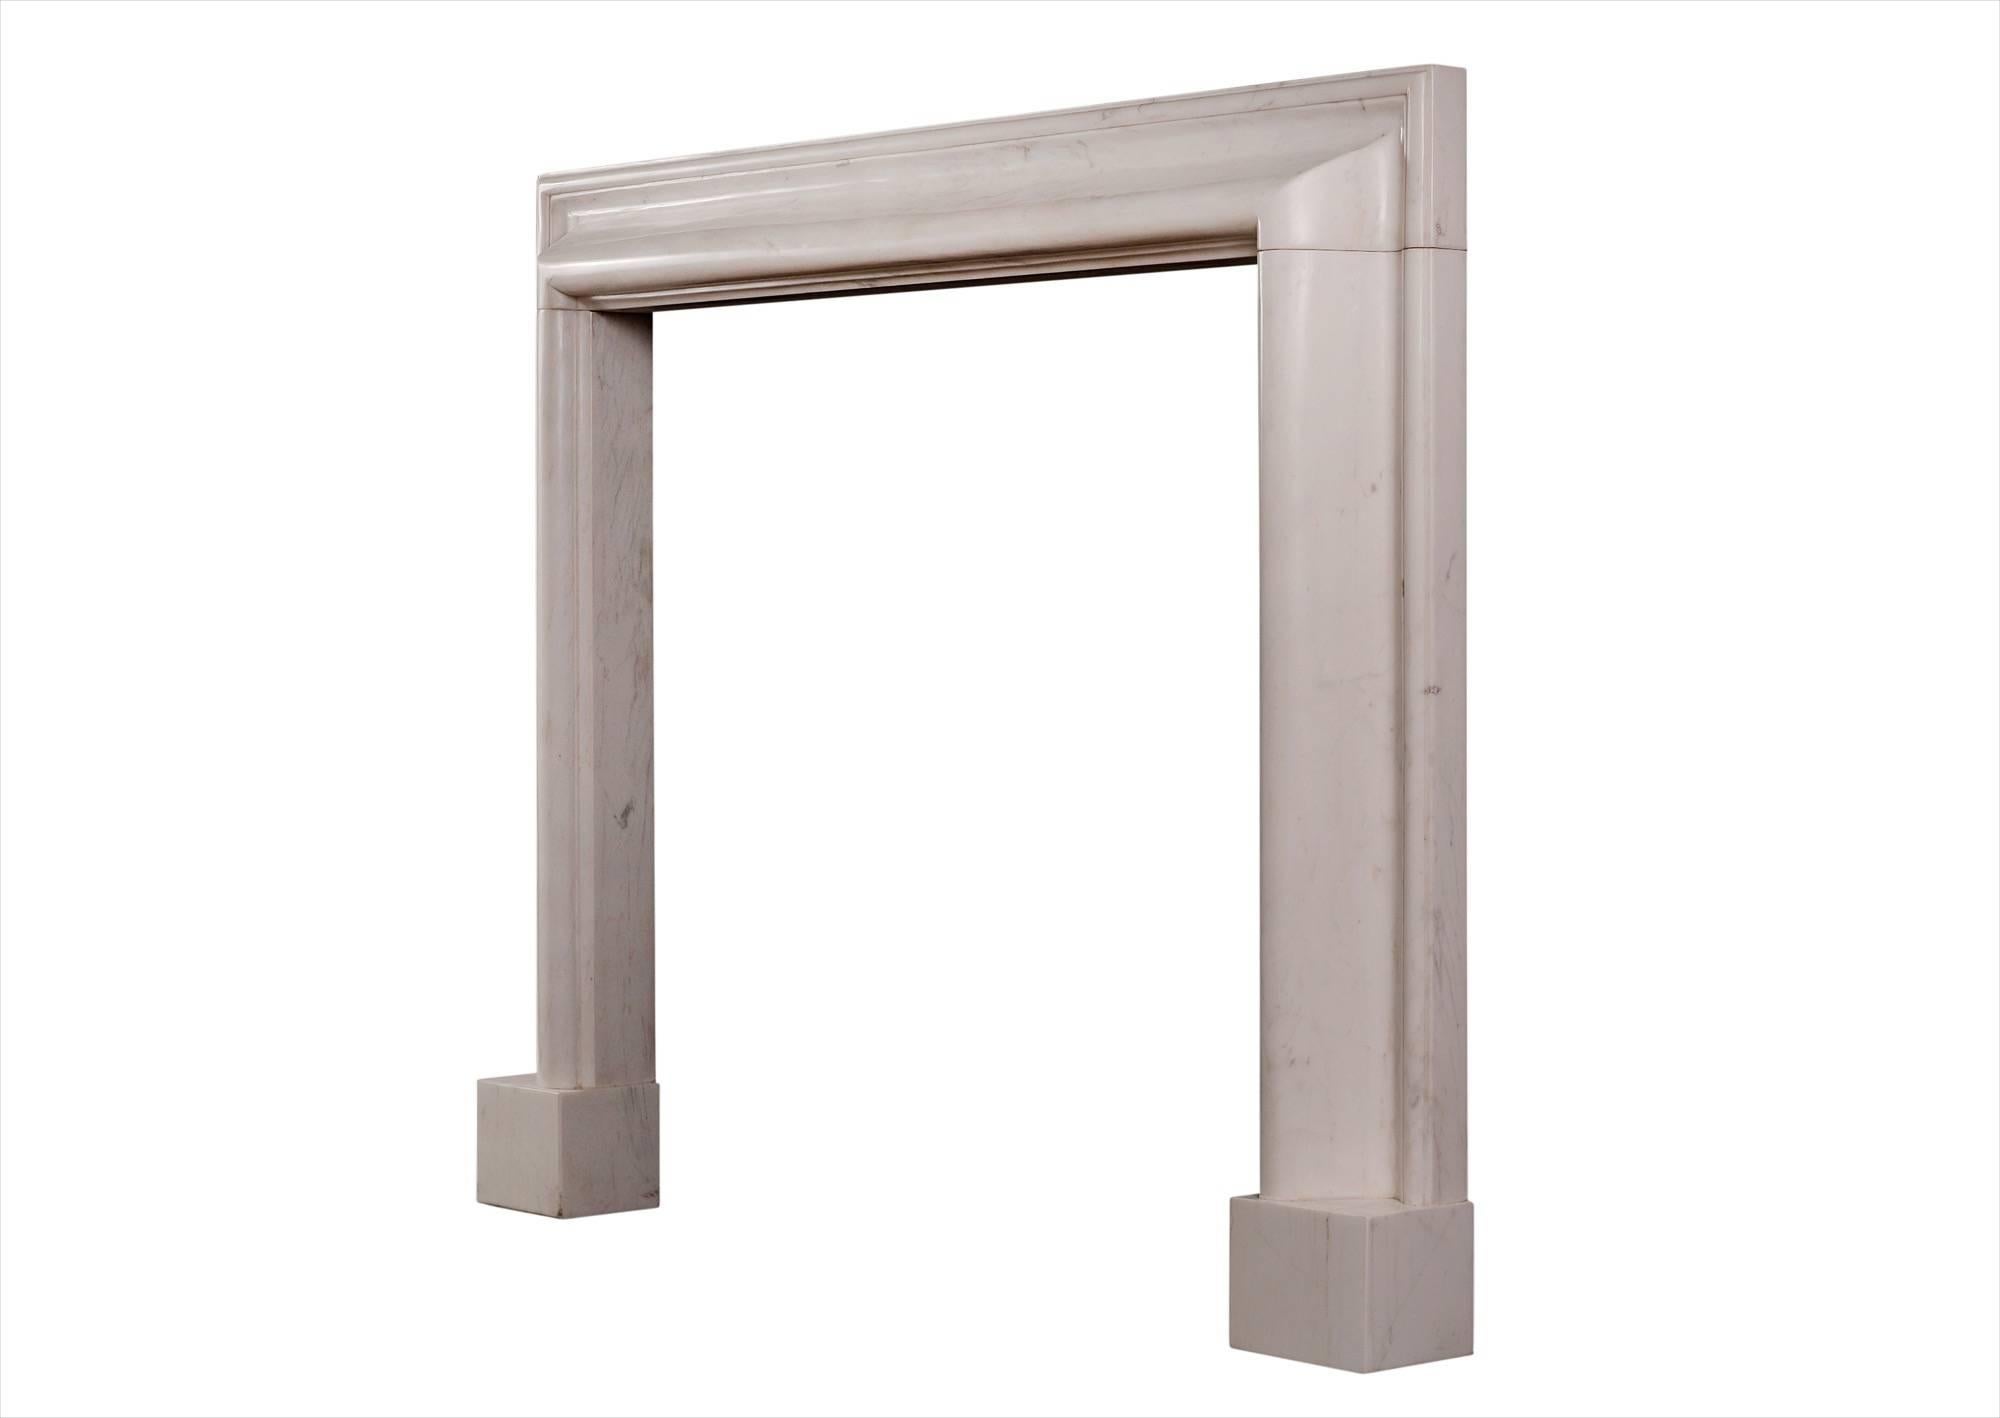 English White Marble Bolection Fireplace For Sale